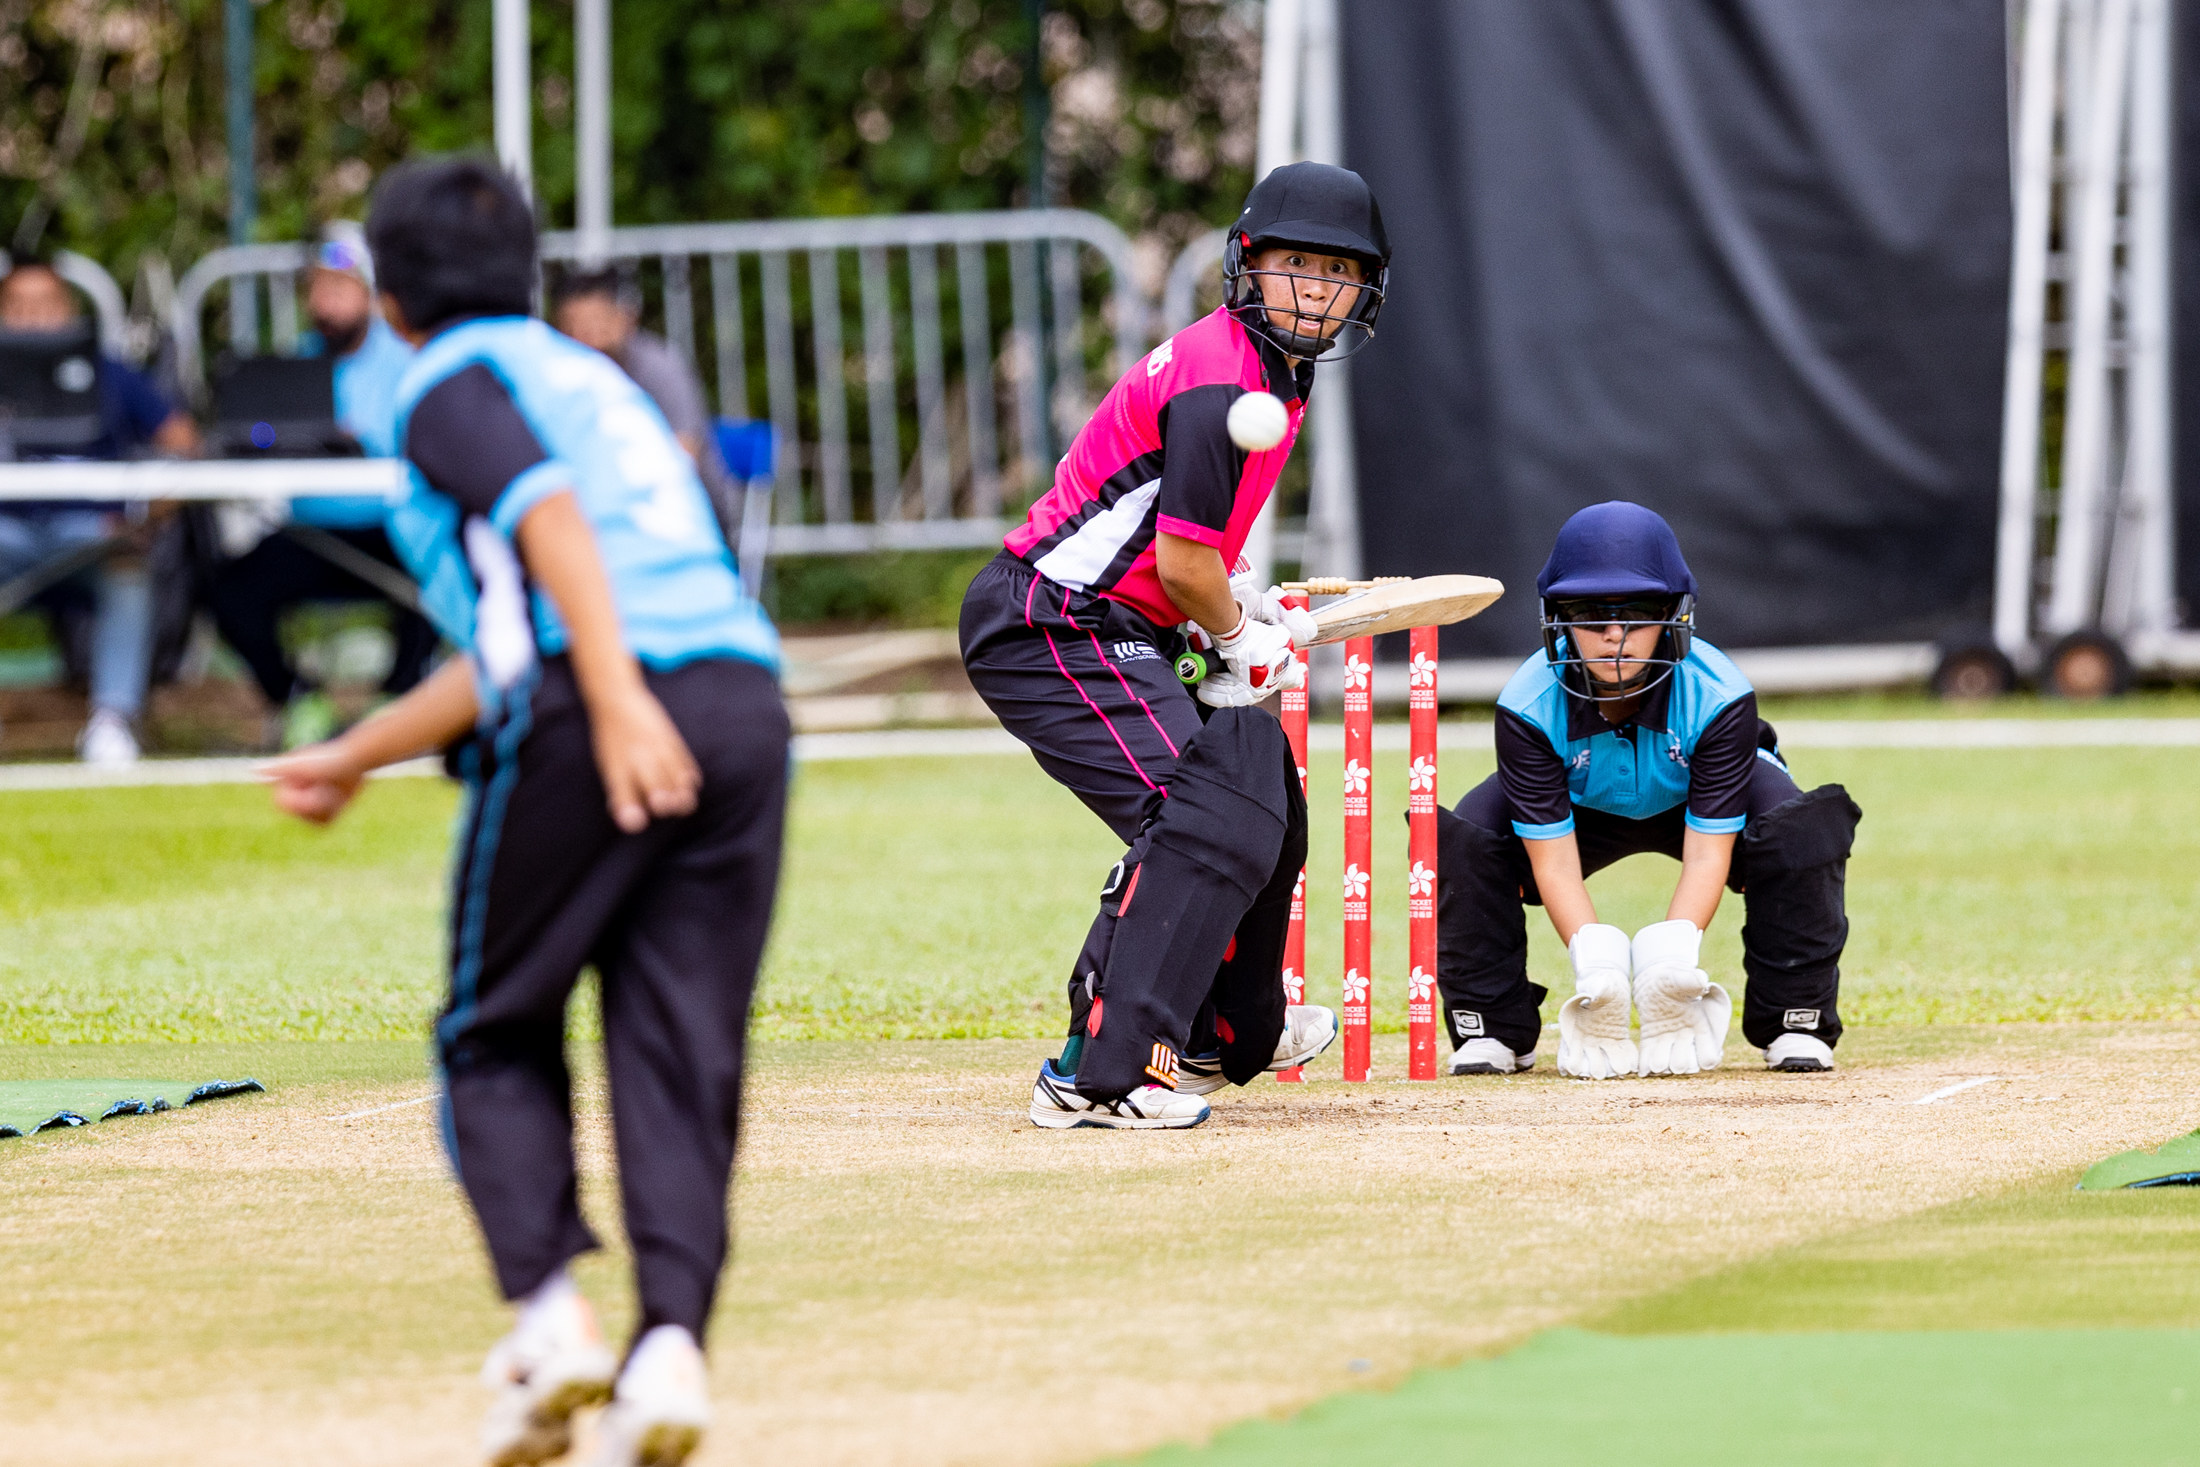 Kary Chan bats for the Bauhinia Stars during the women’s All Star game against the Jade Jets. Photo: We Sport Images